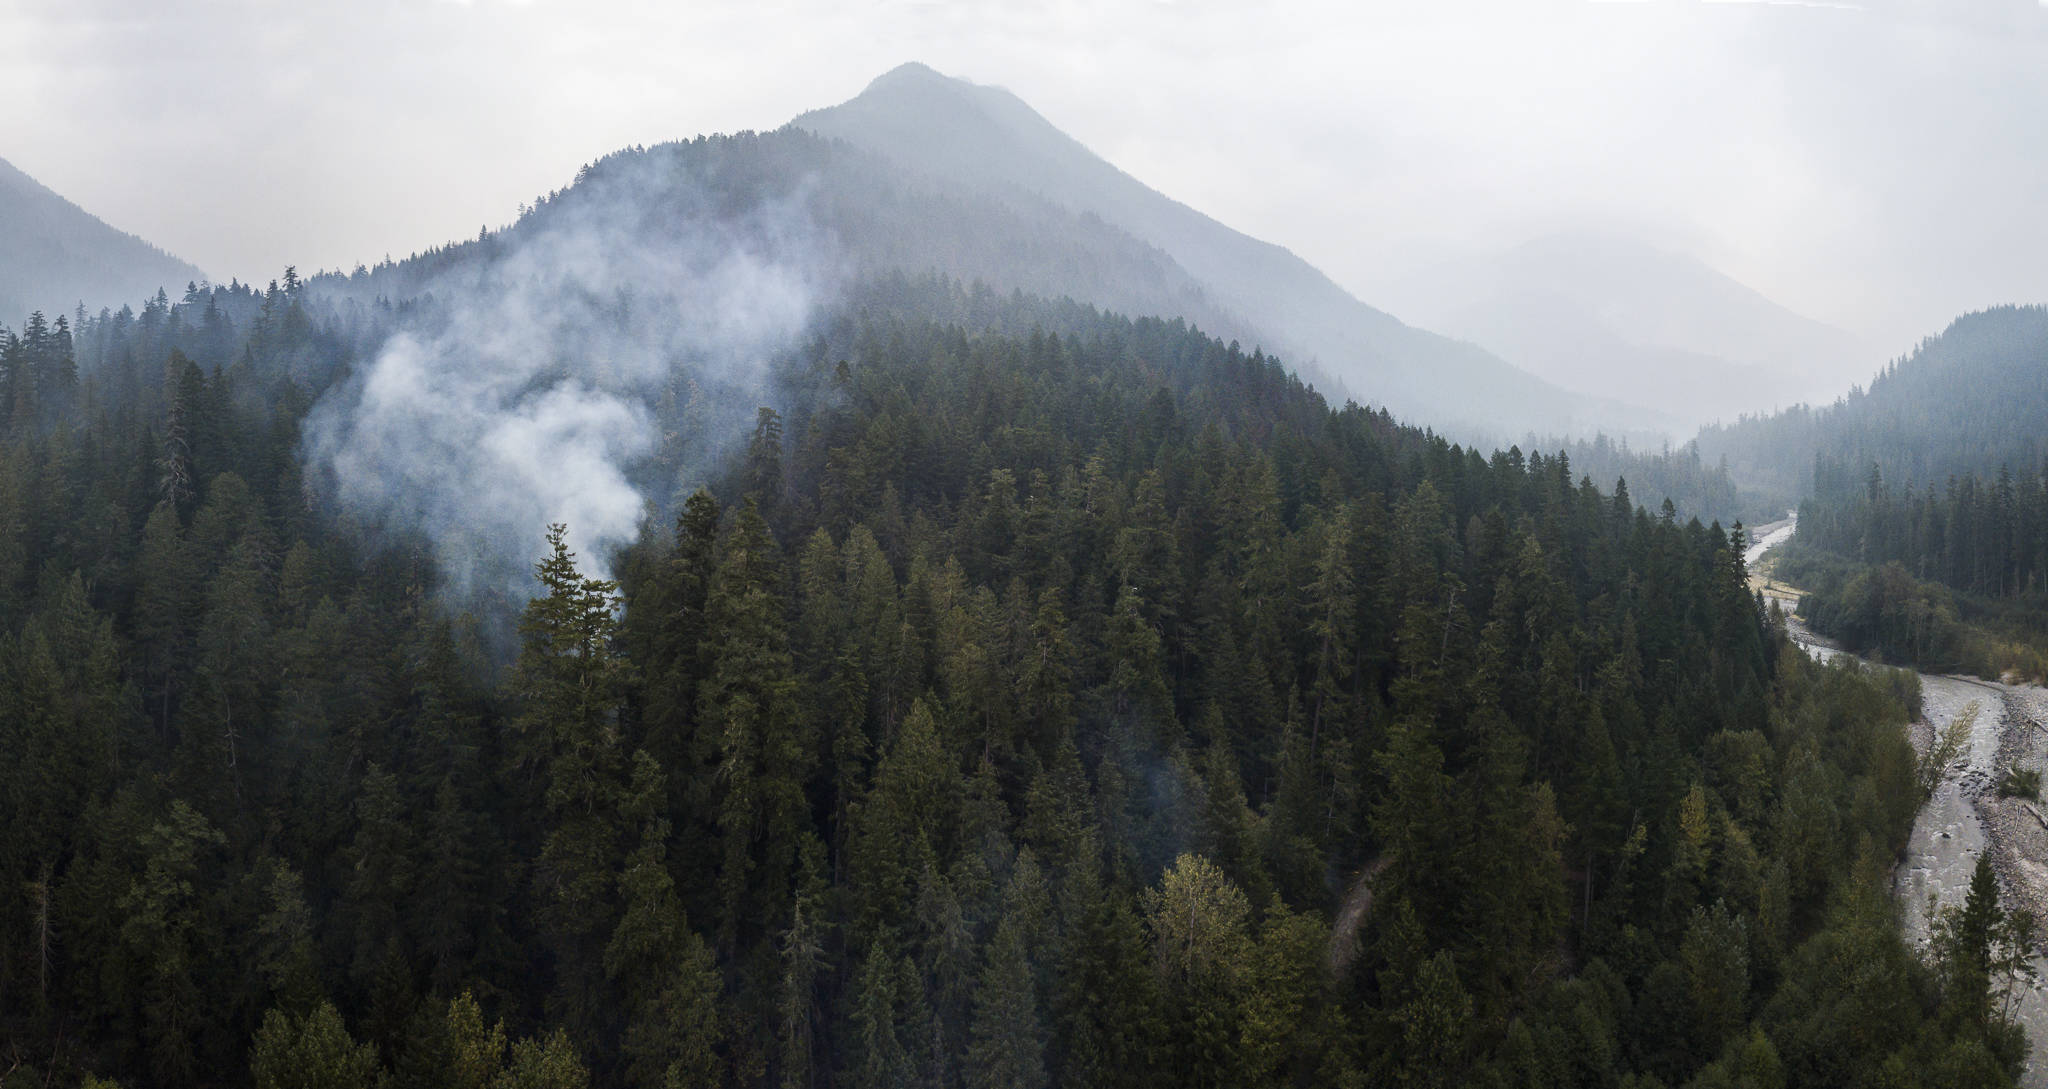 Smoke rises from the Downey Creek fire Sept. 18 off of Suiattle River Road in Darrington. (Olivia Vanni / The Herald)